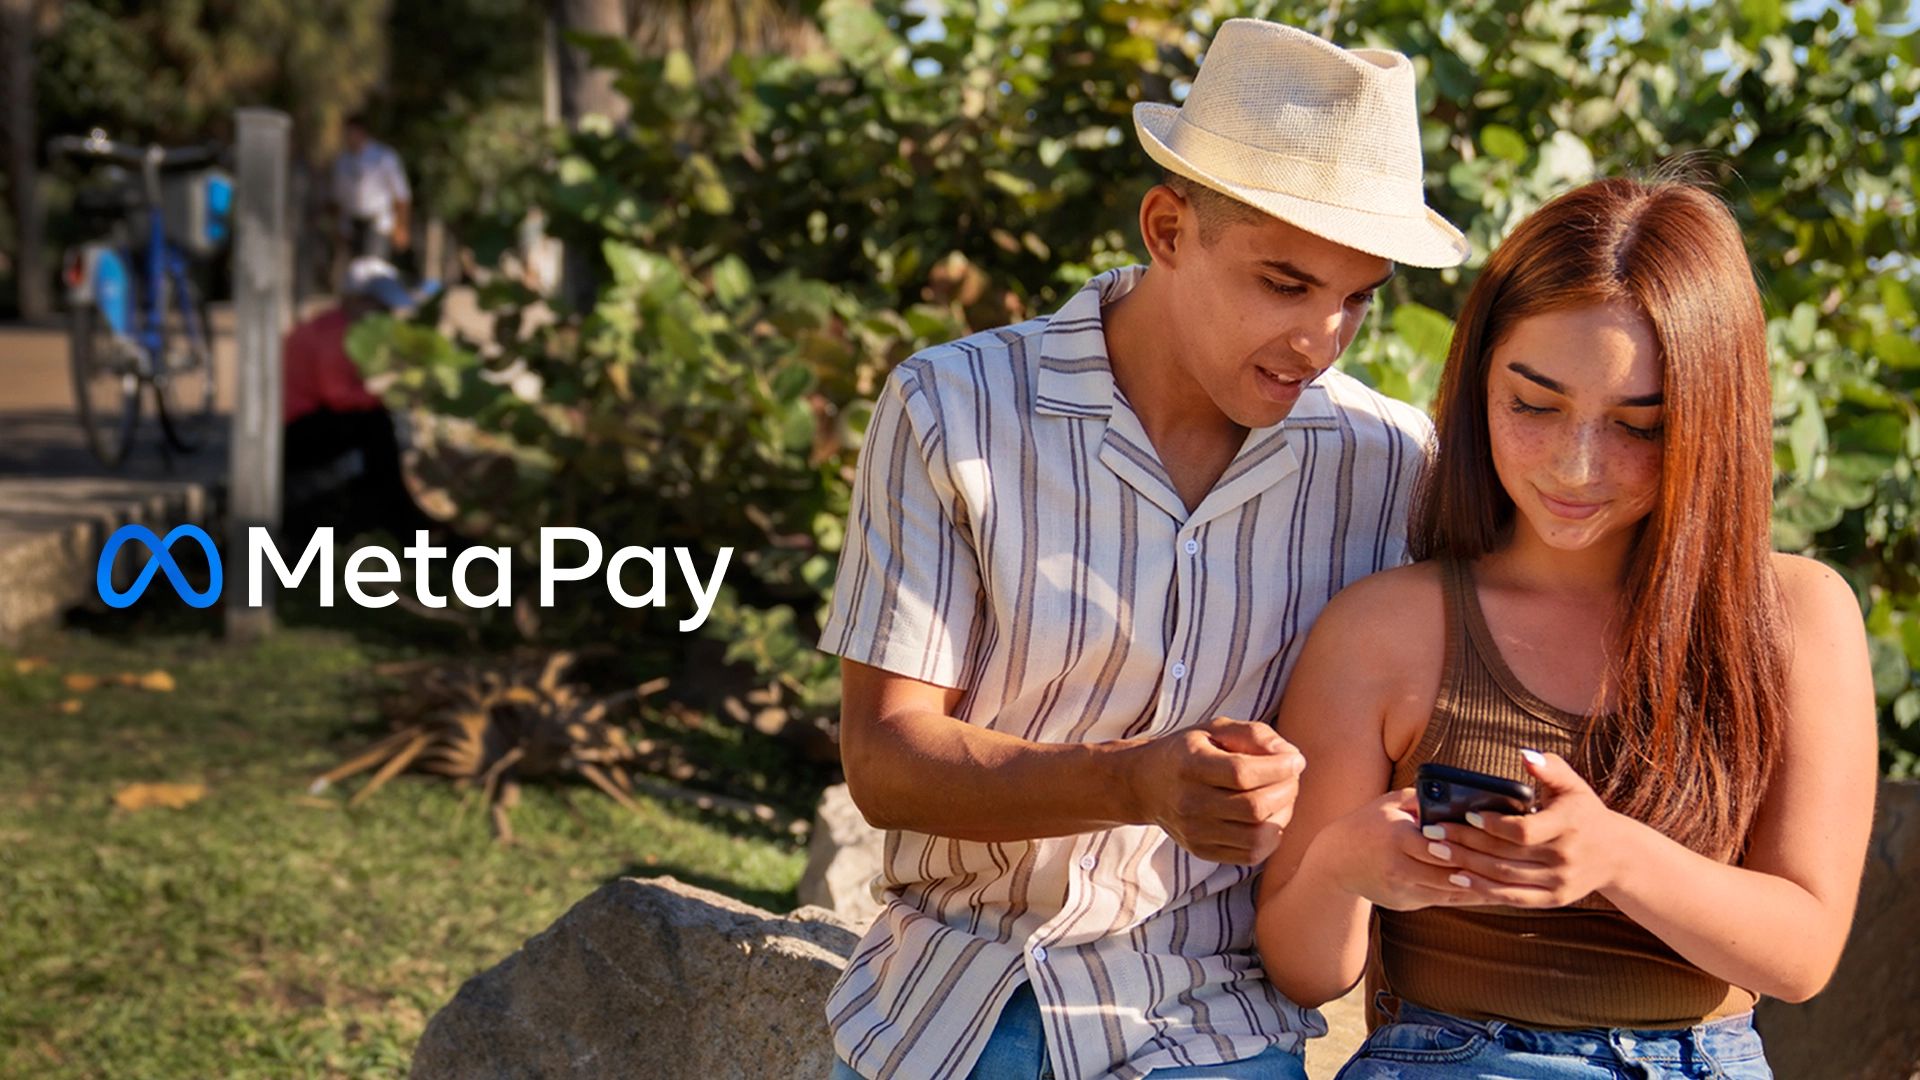 In this article, we are going to be covering what is Meta Pay, as well as its features and changes compared to the previous Facebook Pay.